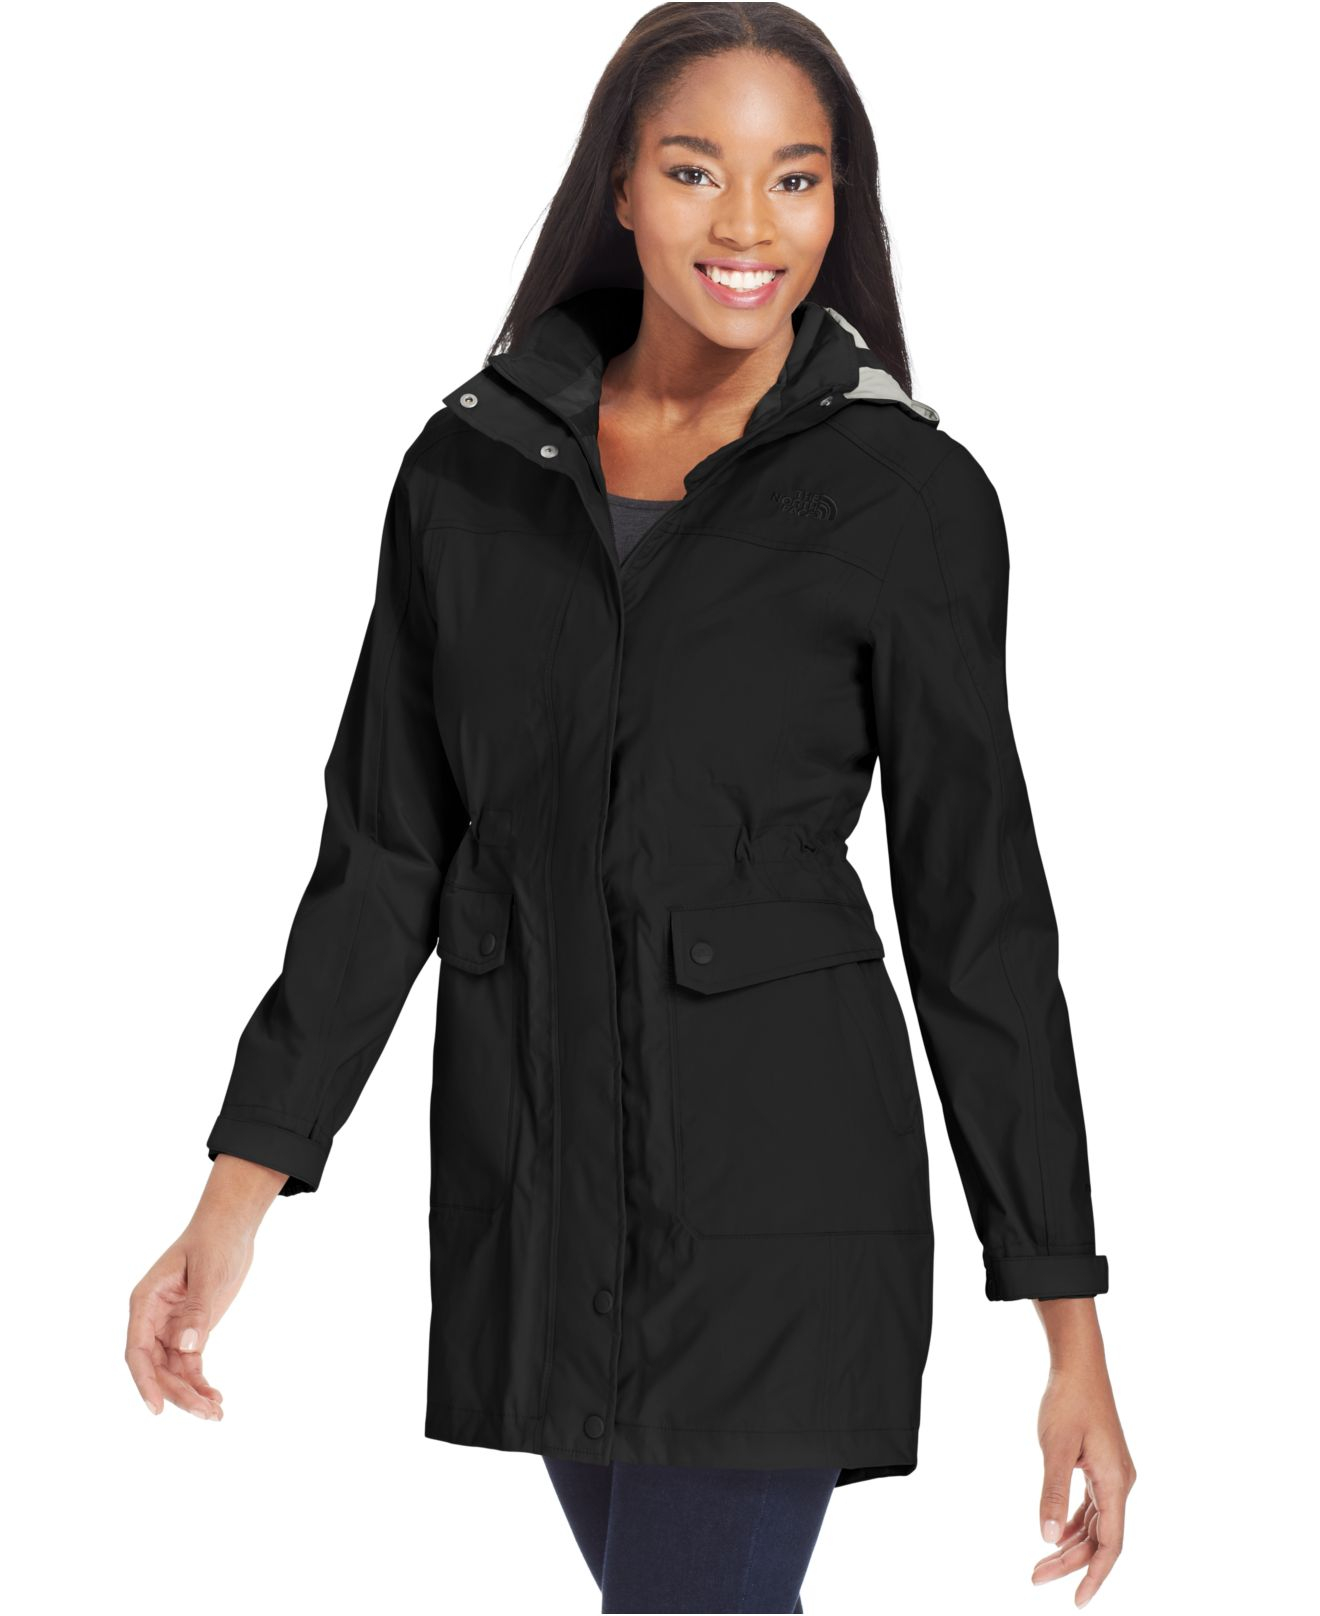 Lyst - The North Face Quiana Hooded Rain Jacket in Black